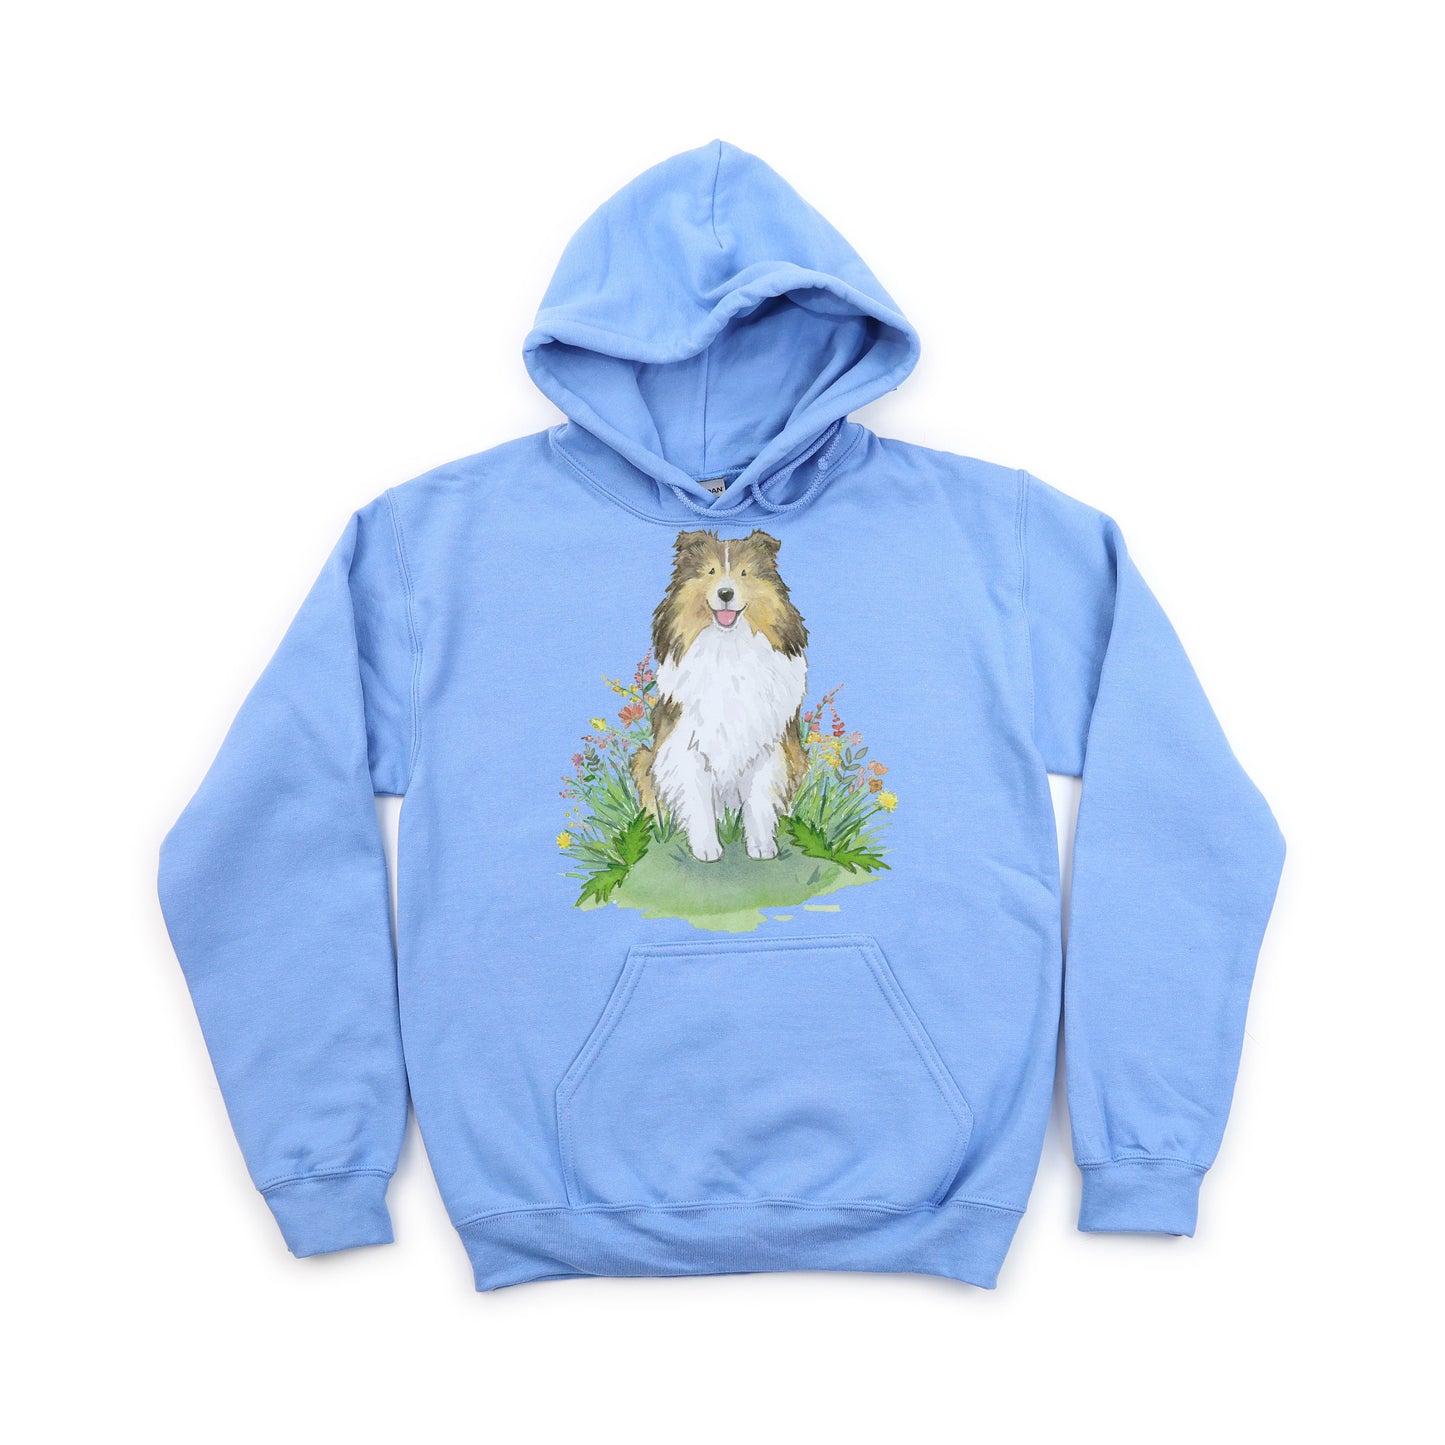 Light Blue hooded sweatshirt with sable shetland sheepdog and flowers on it.